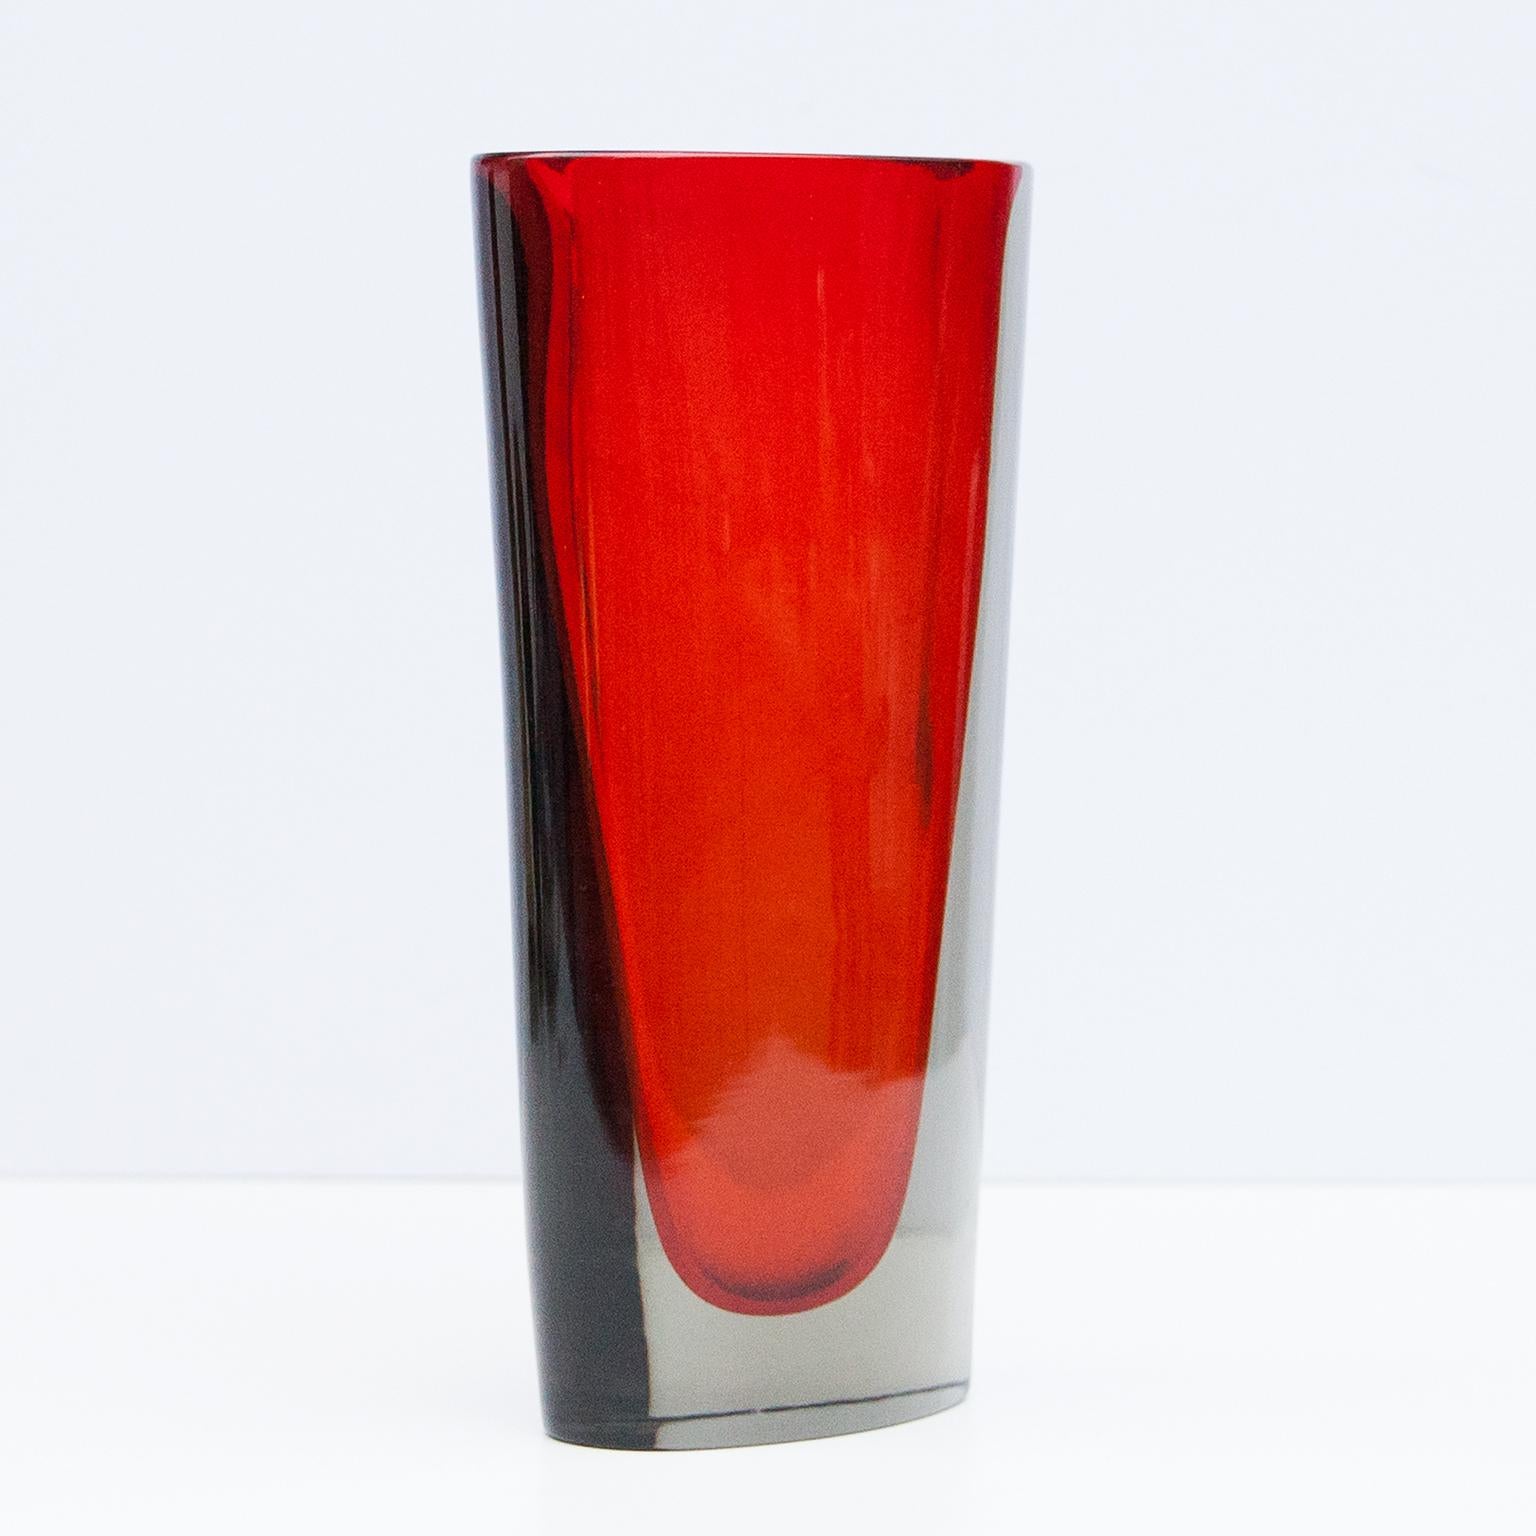 Murano vase made in red and clear Murano glass, designed by Flavio Poli for Seguso, Italy 1960s.

